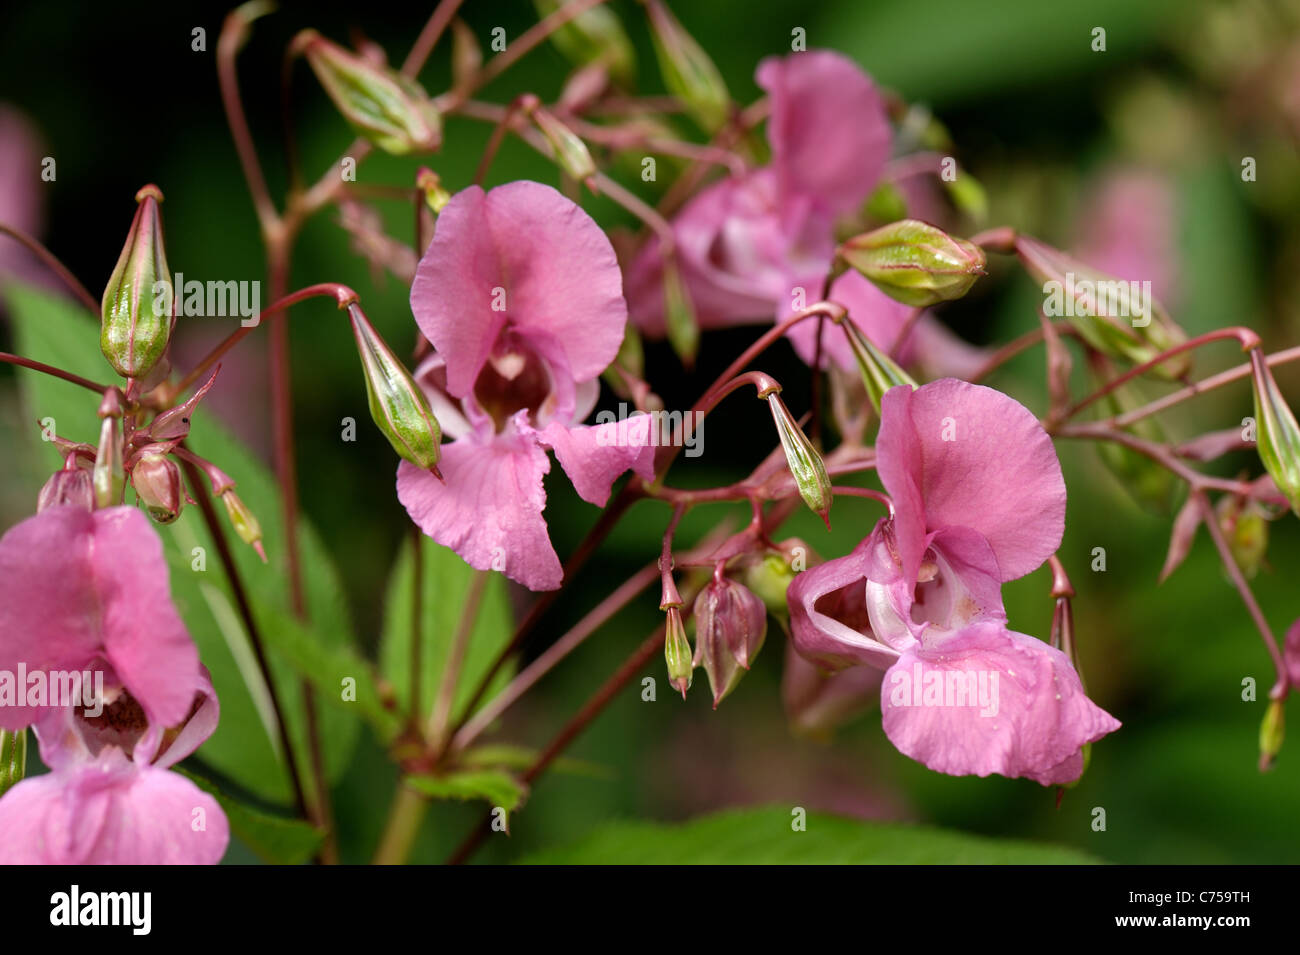 Himalayan balsam (Impatiens gladulifera) flowers and seedpods Stock Photo